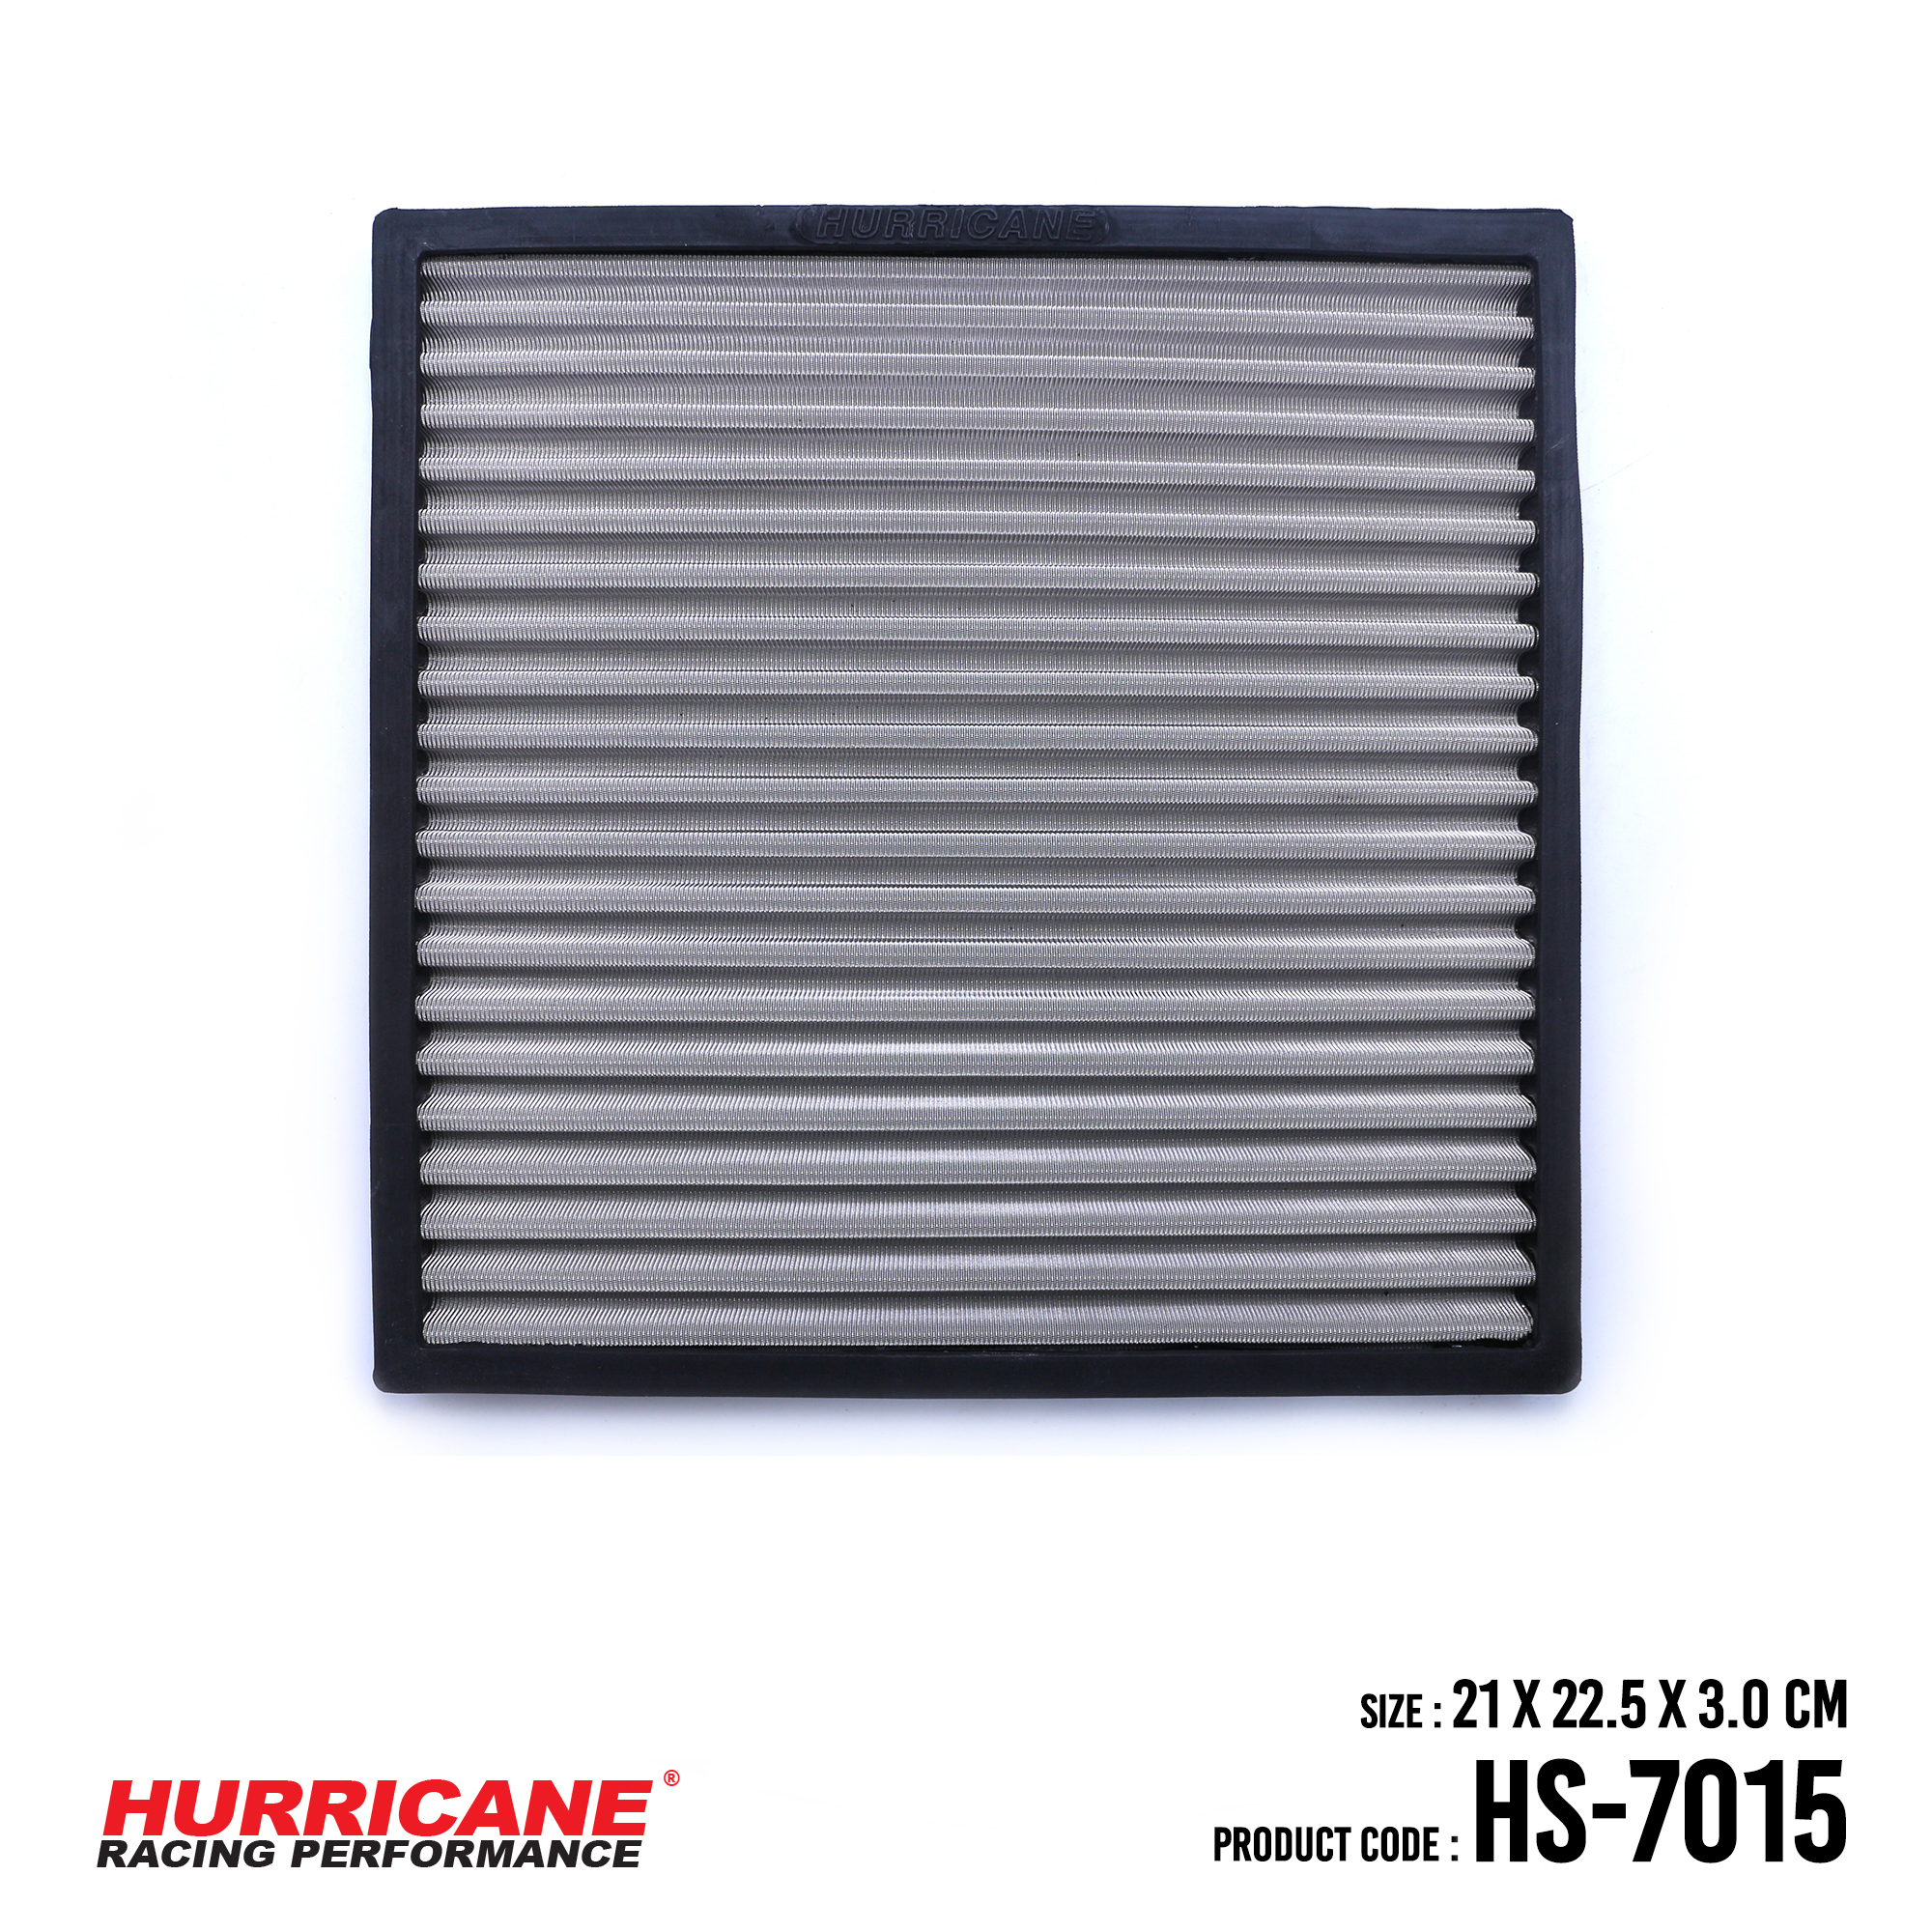 HURRICANE STAINLESS STEEL CABIN AIR FILTER FOR HS-7015 Mitsubishi